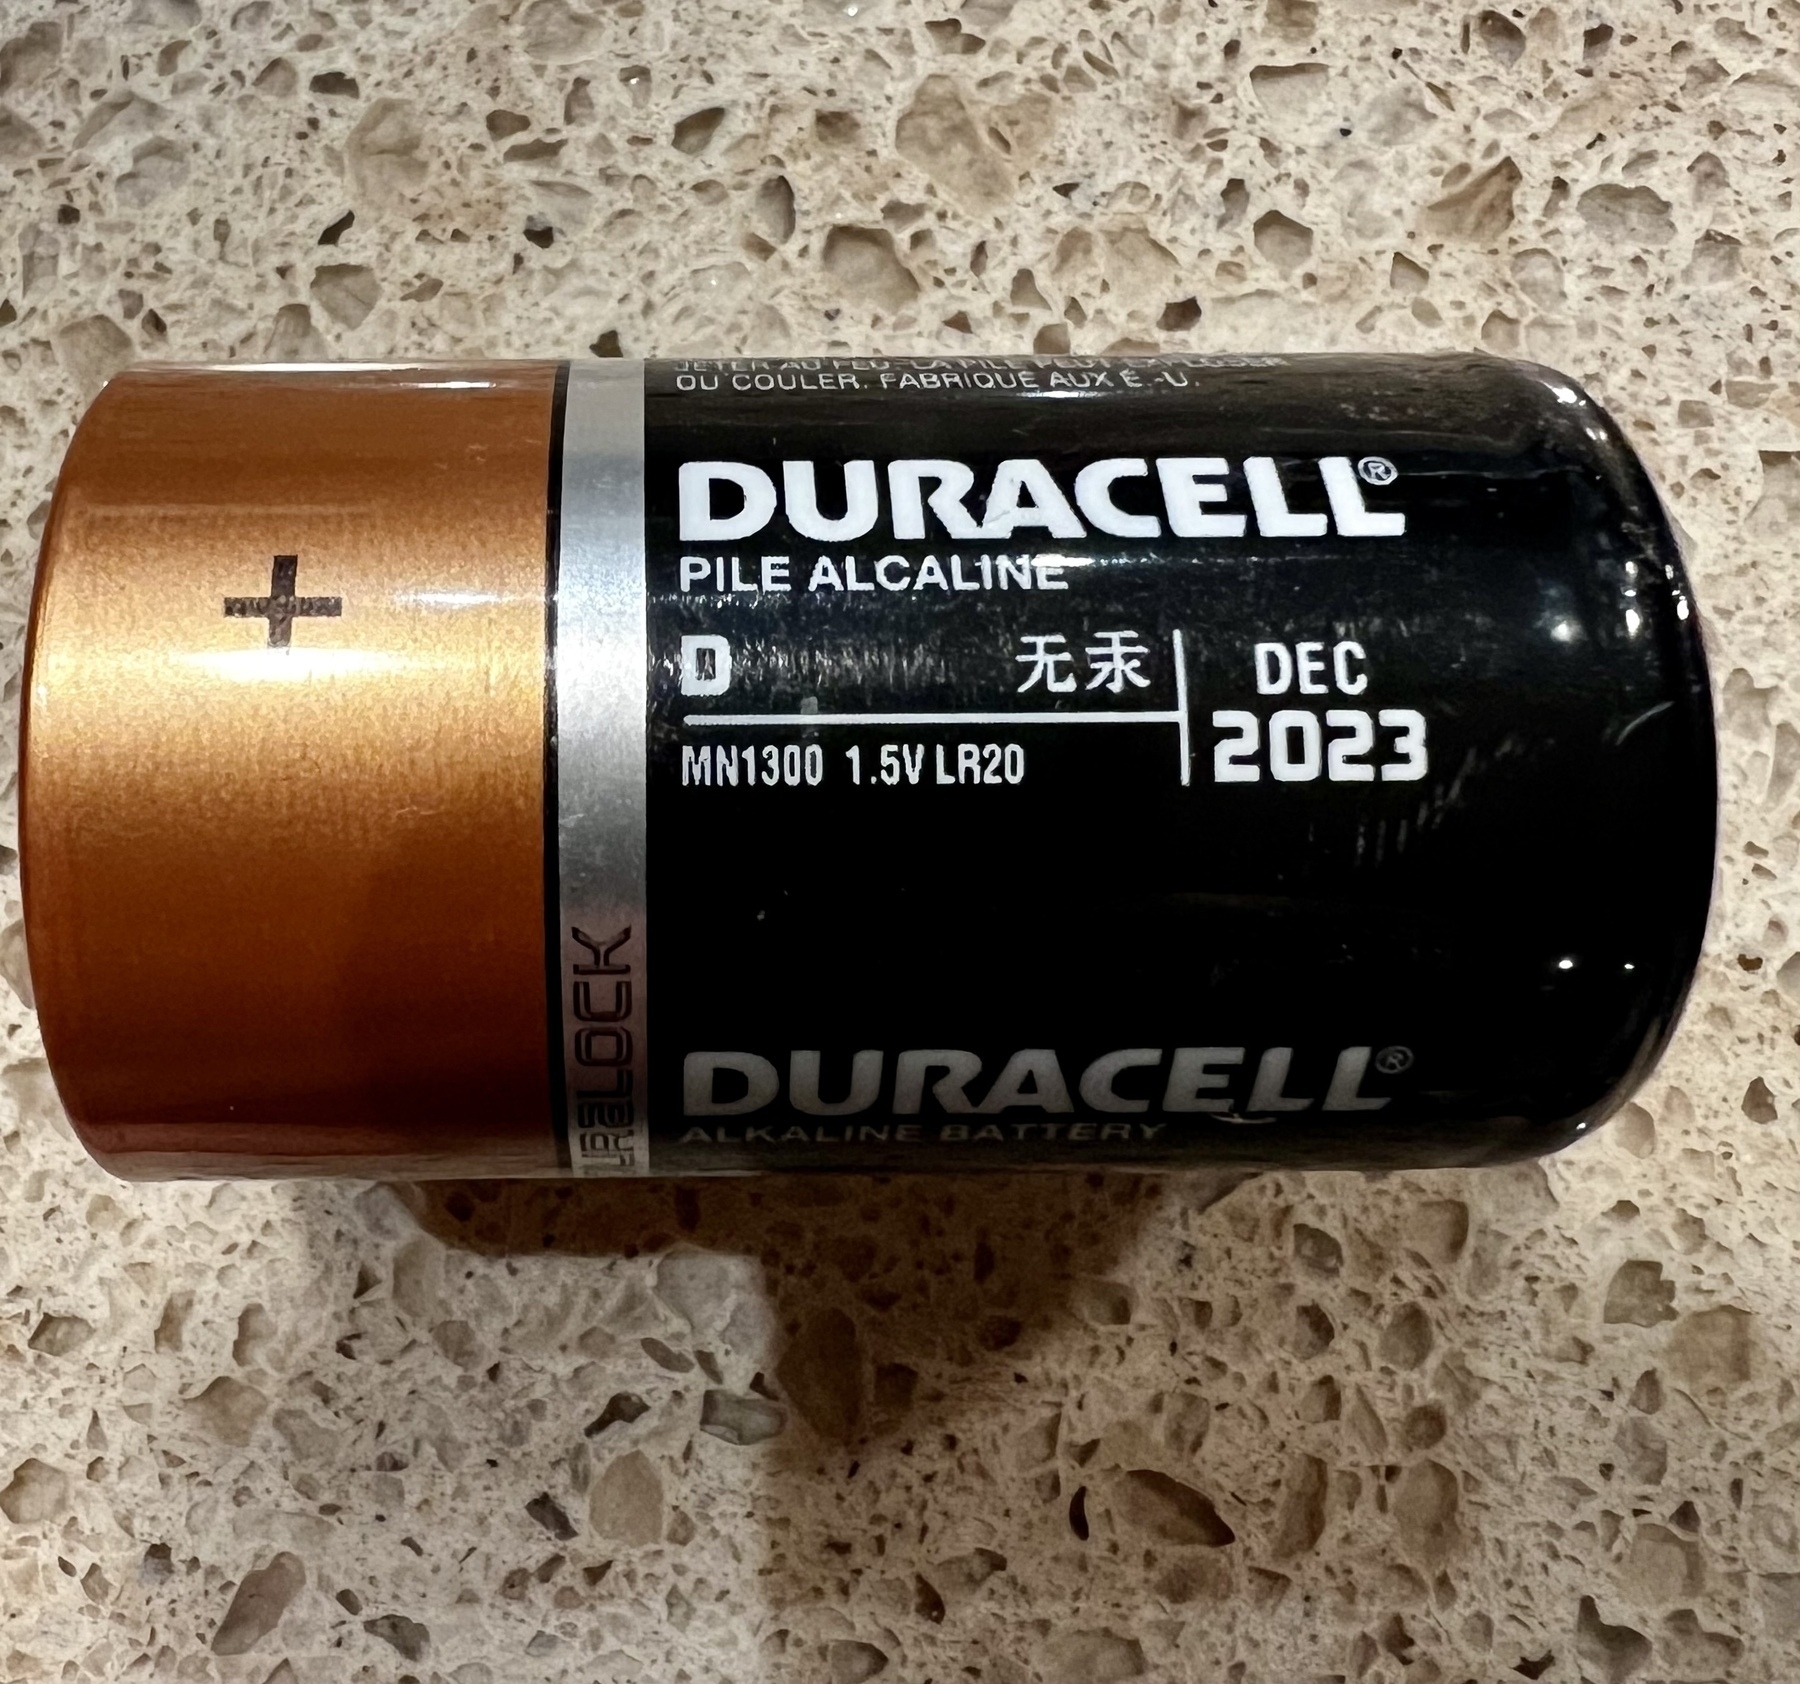 A D battery with an expiration date of December 2023. 